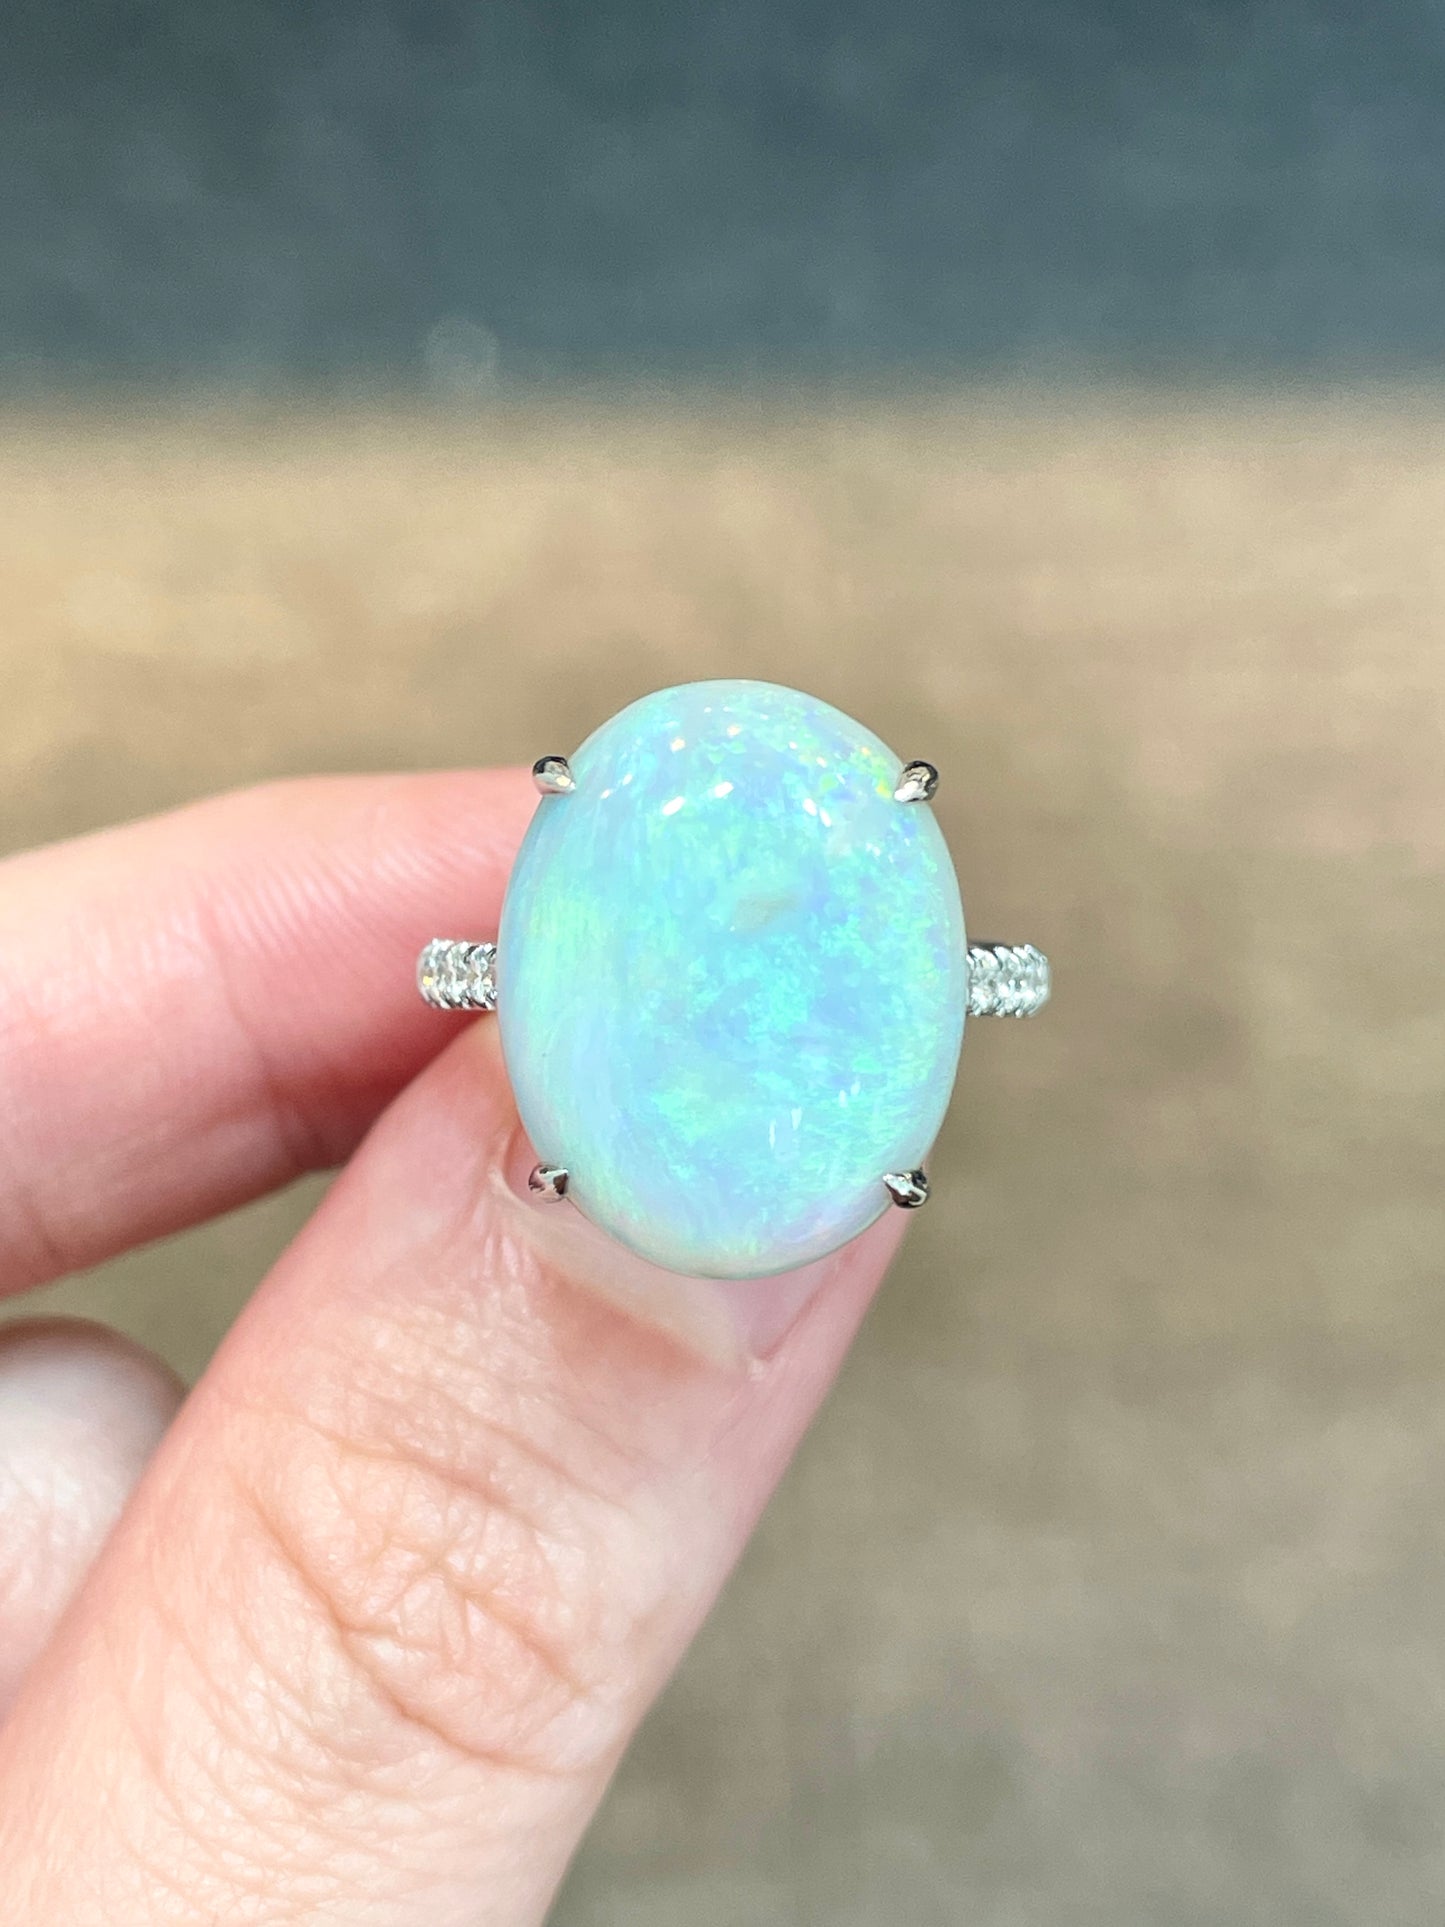 Natural Opal 7.03ct Ring Set With Natural Diamonds In 18K White Gold Singapore Gemstone Fine Jewellery